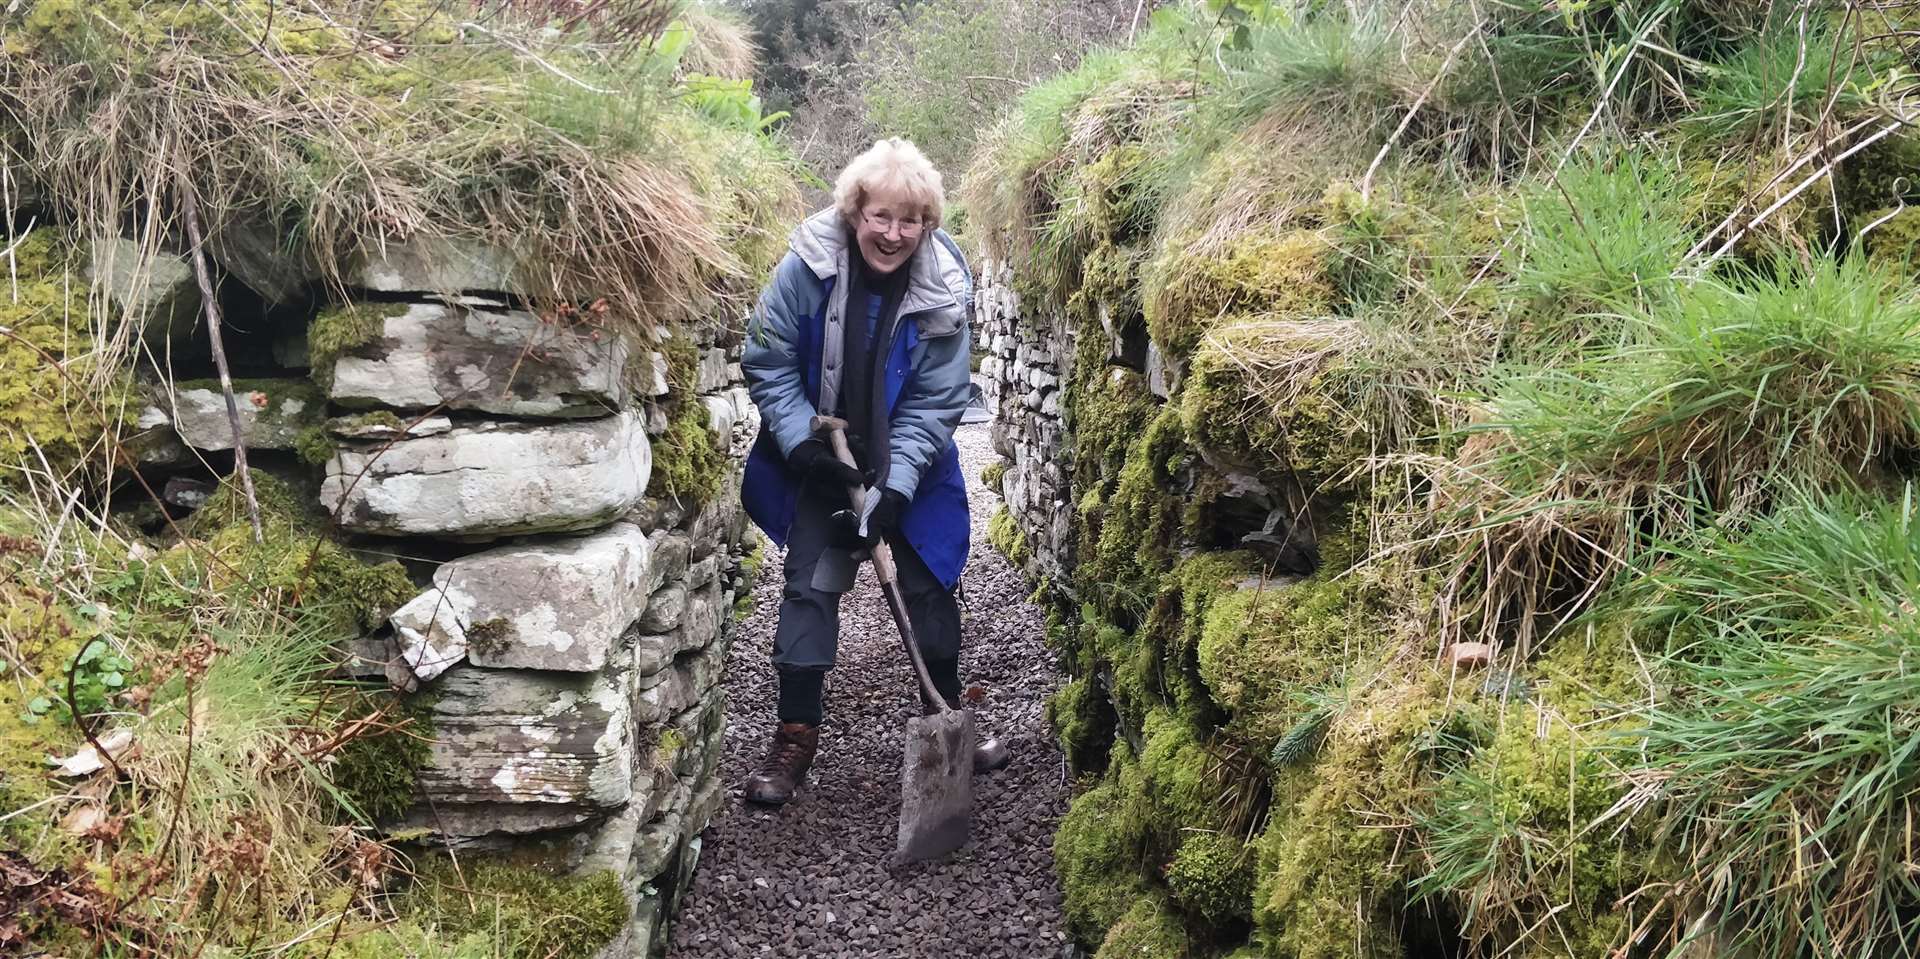 One of the volunteers clearing a path into the broch.